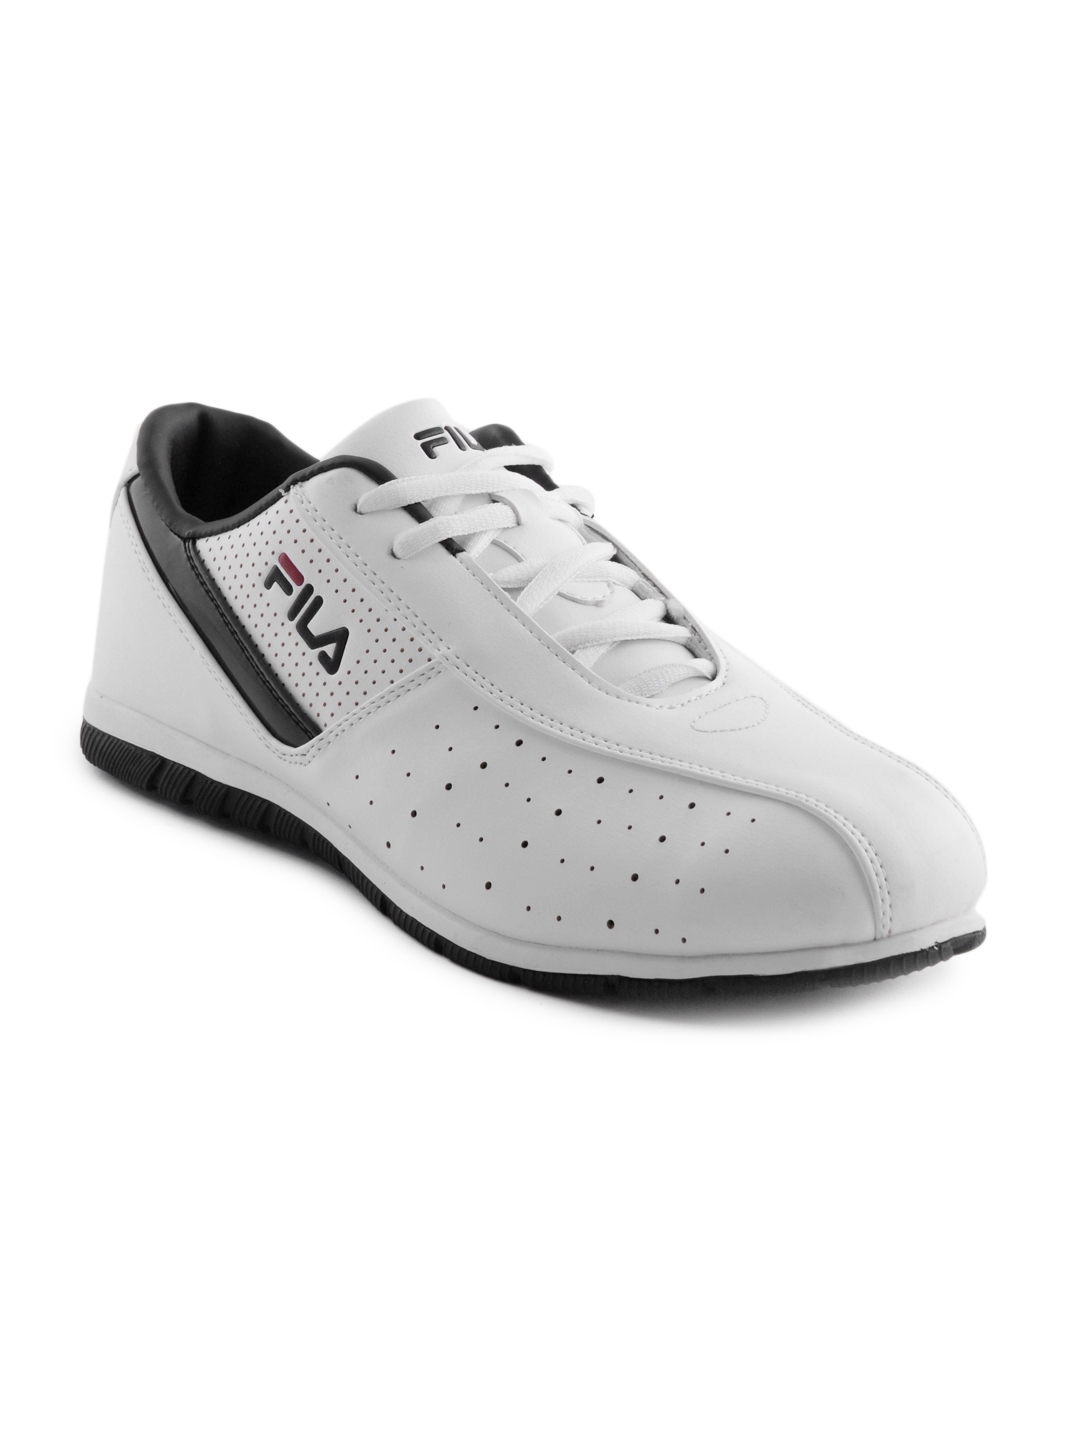 Buy Fila Men Cicadeo White Casual Shoes - Casual Shoes for Men 23914 ...